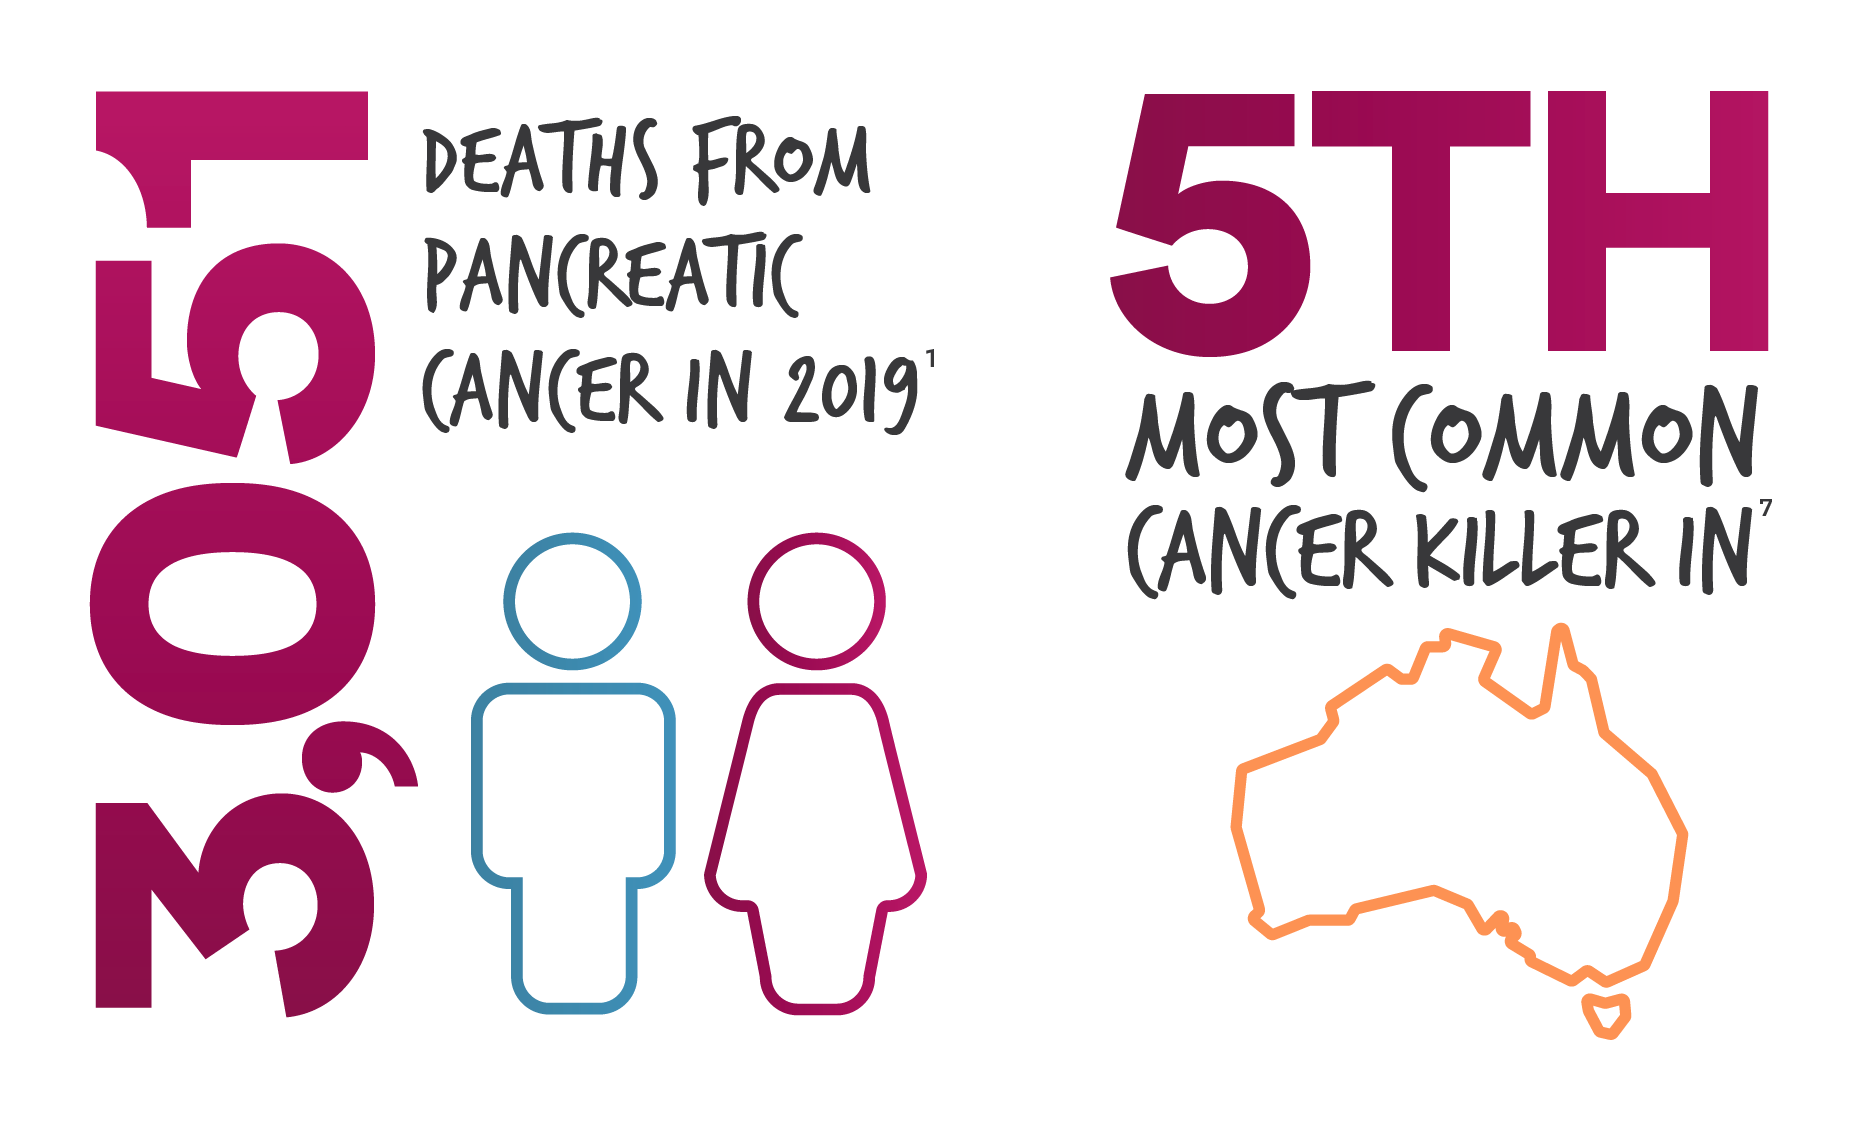 image of "Number of Deaths from Pancreatic Cancer in 2019"